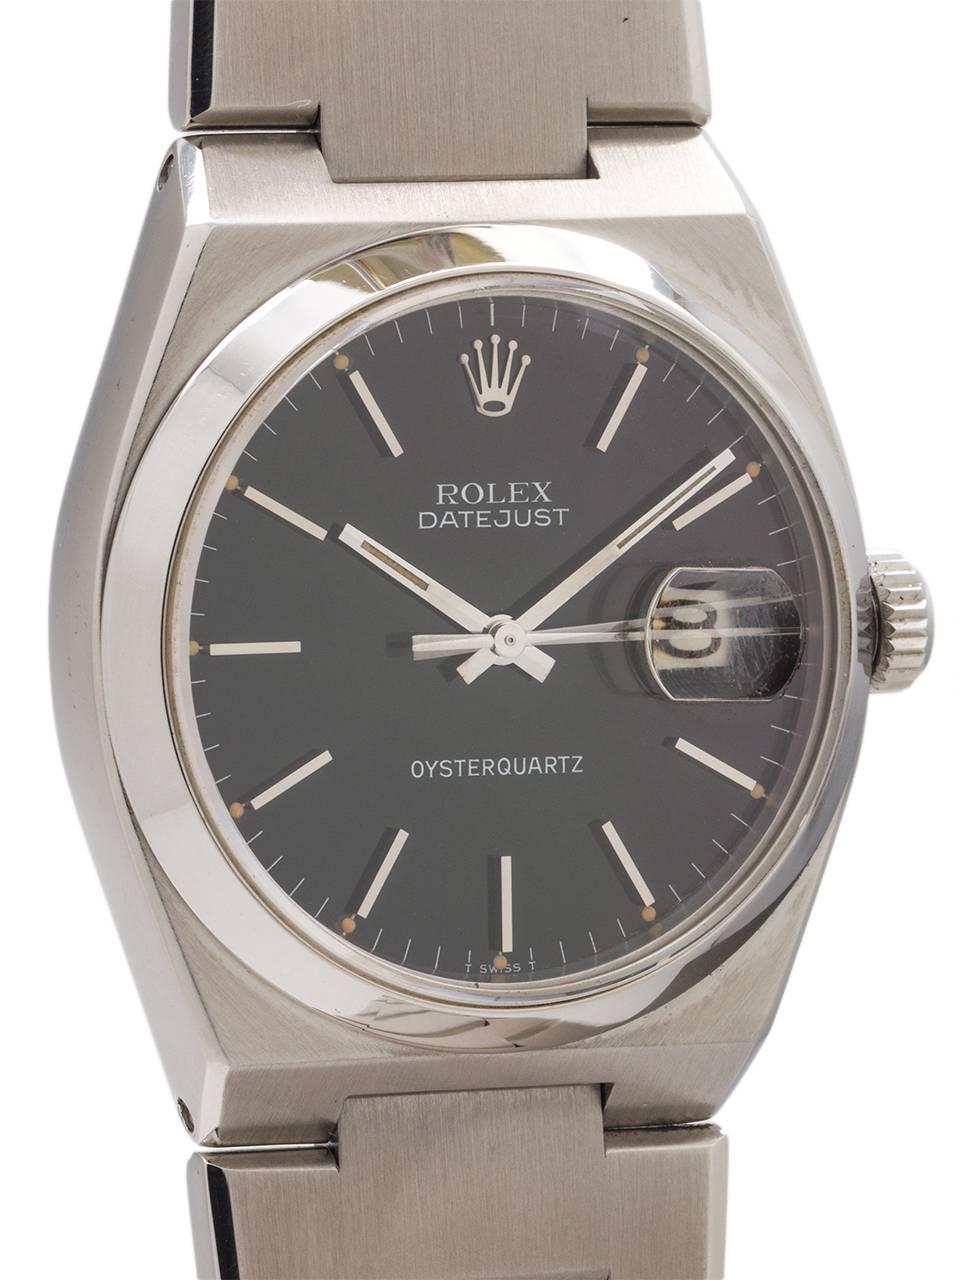 
Rolex Stainless Steel Datejust Oyster Quartz ref 17000 serial # 5.5 million circa 1978. Featuring a 36mm diameter case with smooth bezel, sapphire crystal, and scarce original gloss black dial with applied silver indexes and silver baton hands.